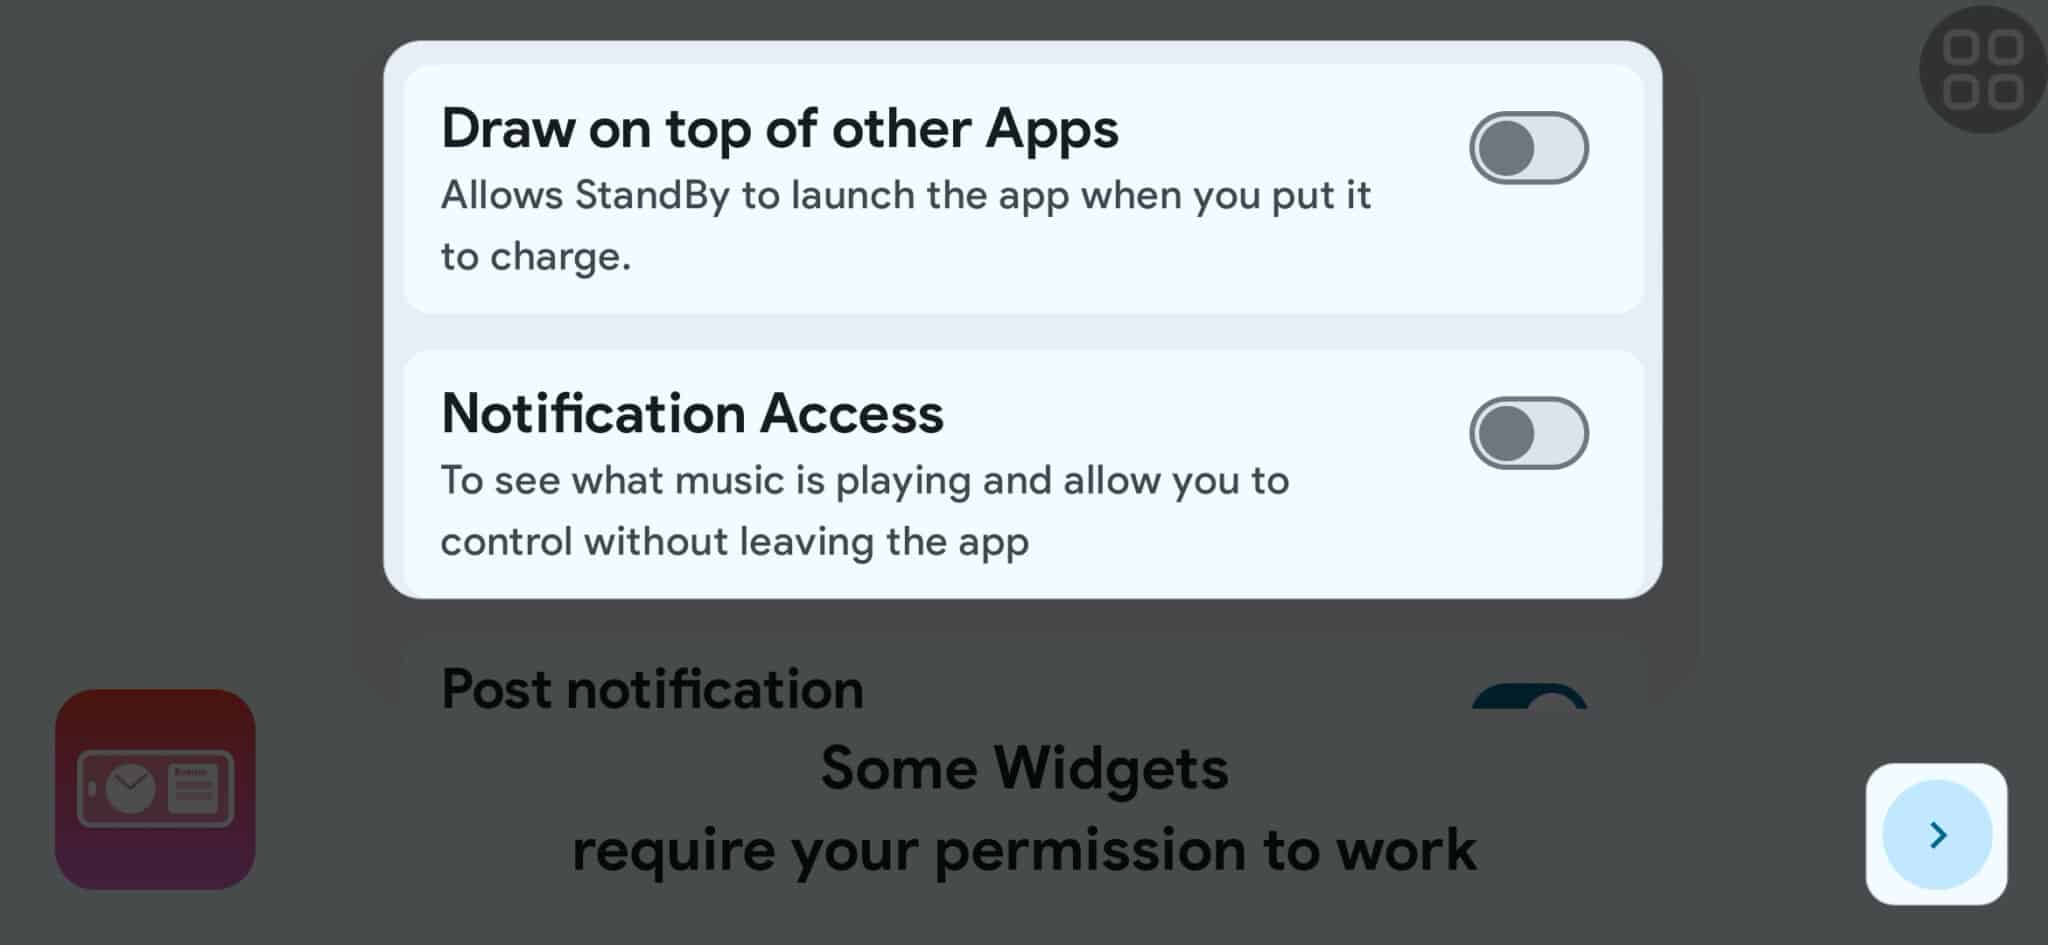 toggle-on-permissions-and-tap-icon-on-standby-mode-pro-app-scaled